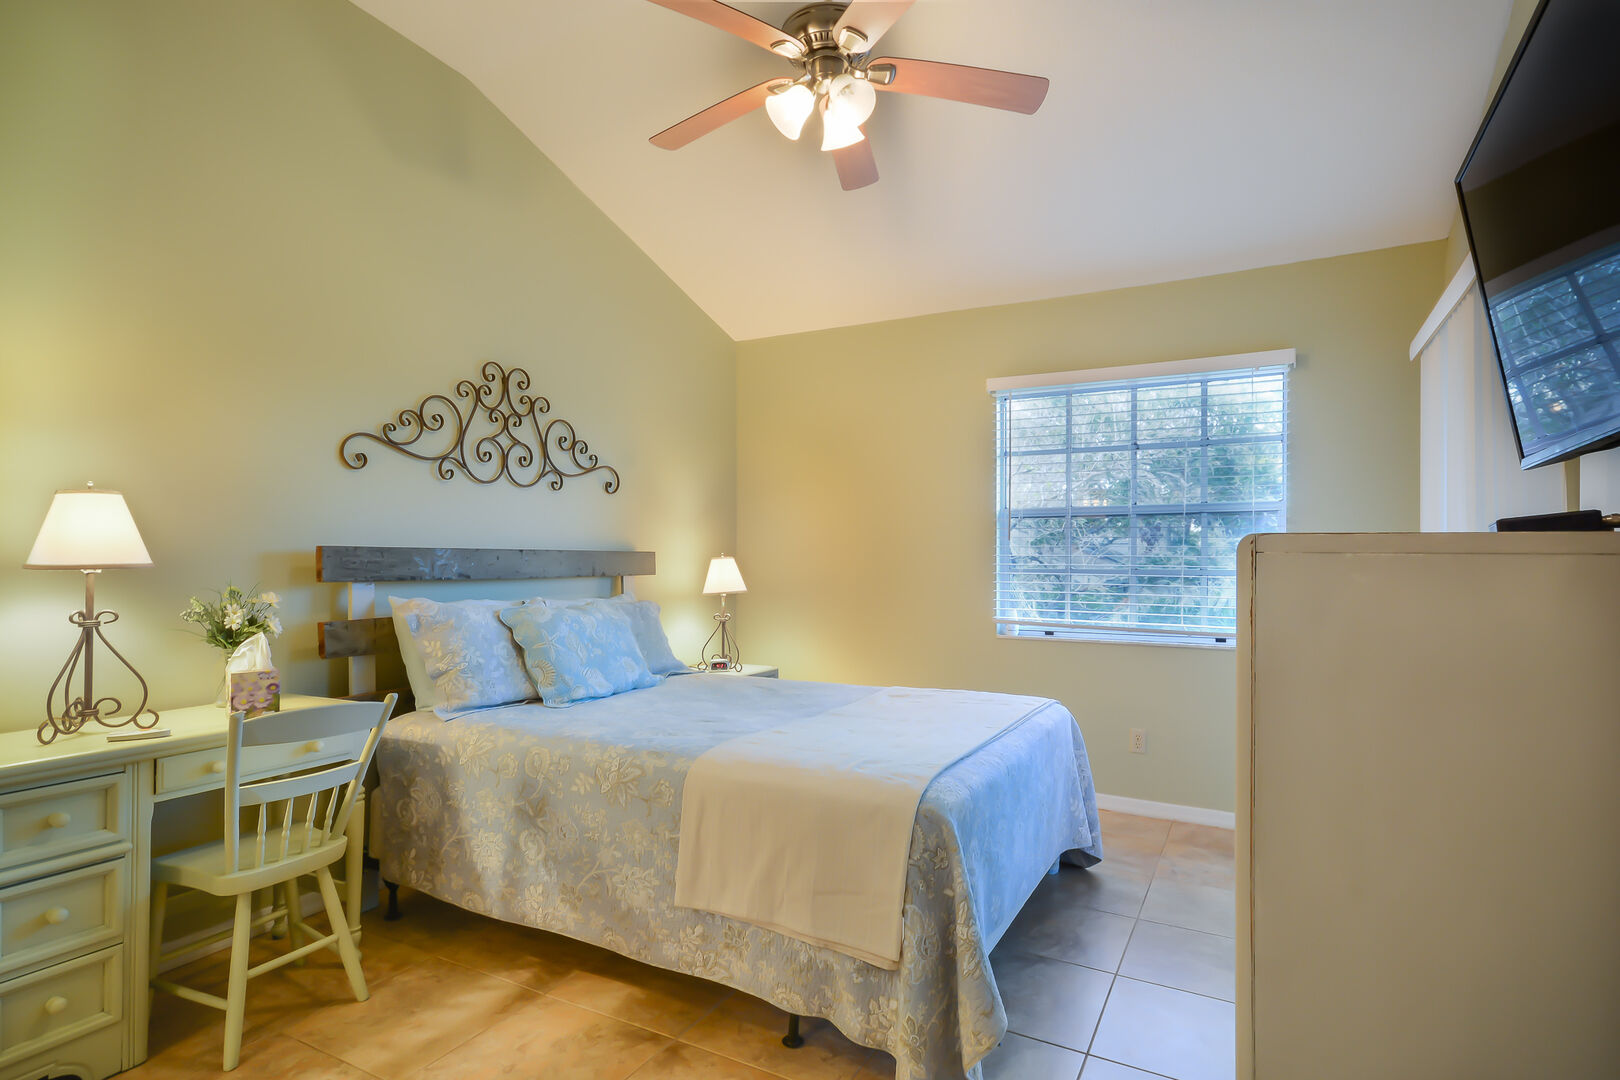 Master bedroom of this vacation rental in New Smyrna Beach FL with a queen-sized bed, large flat-screen TV, and Desk area.